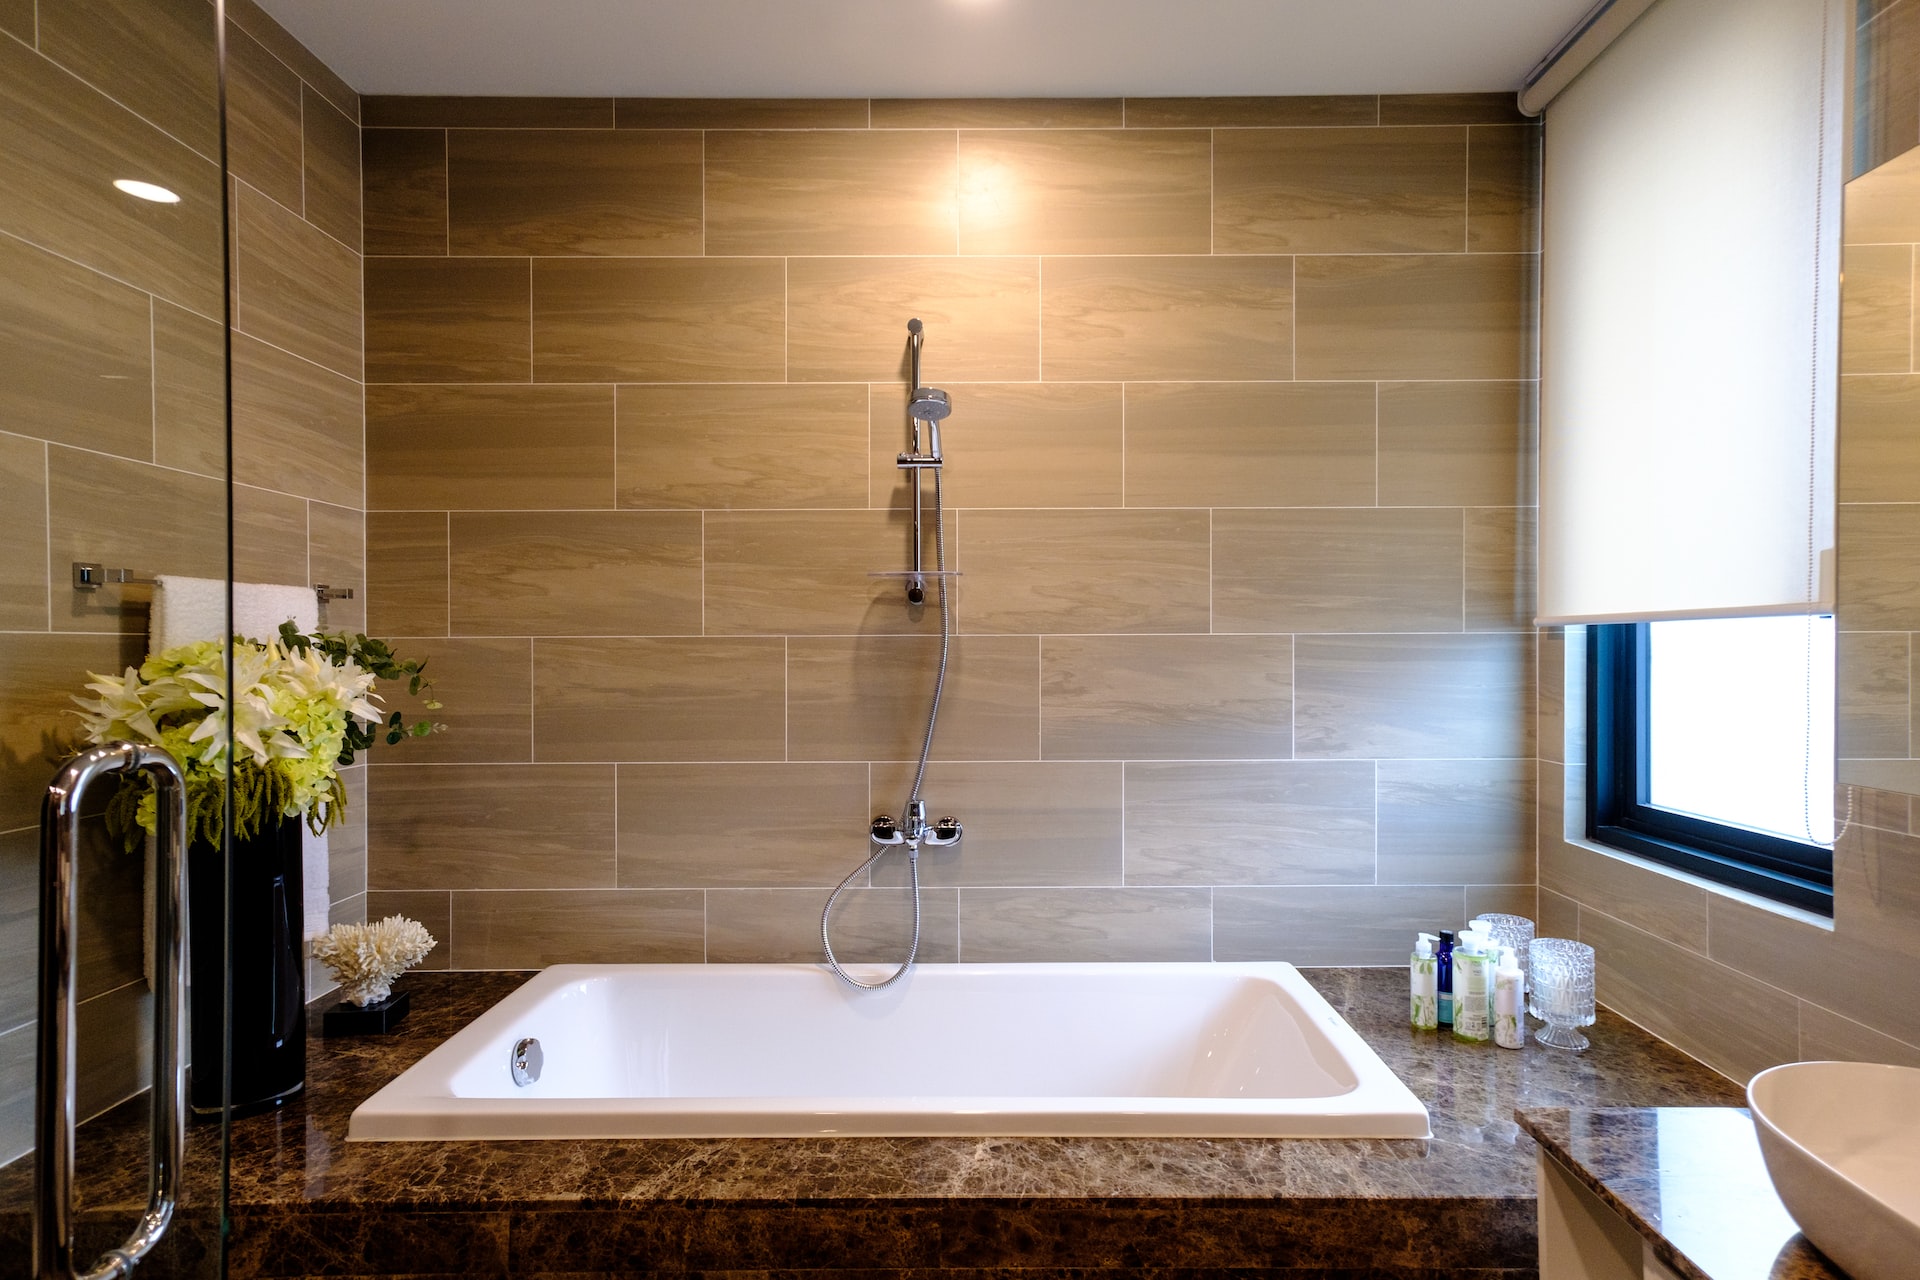 An elegant tiled bathroom featuring a built-in tub and natural colours